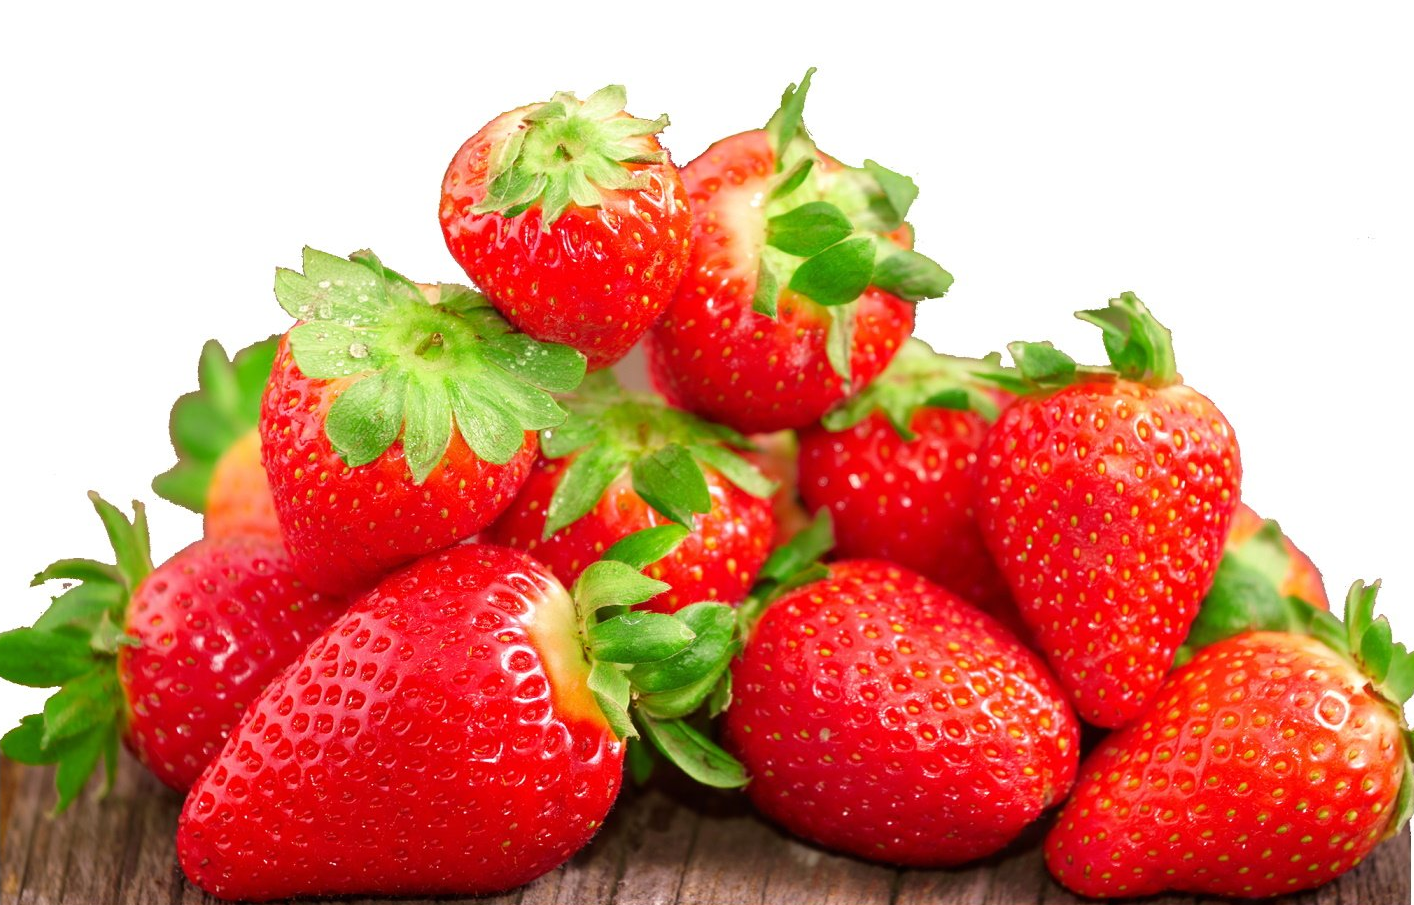 Strawberry, Blueberry, & Raspberry Plants for sale